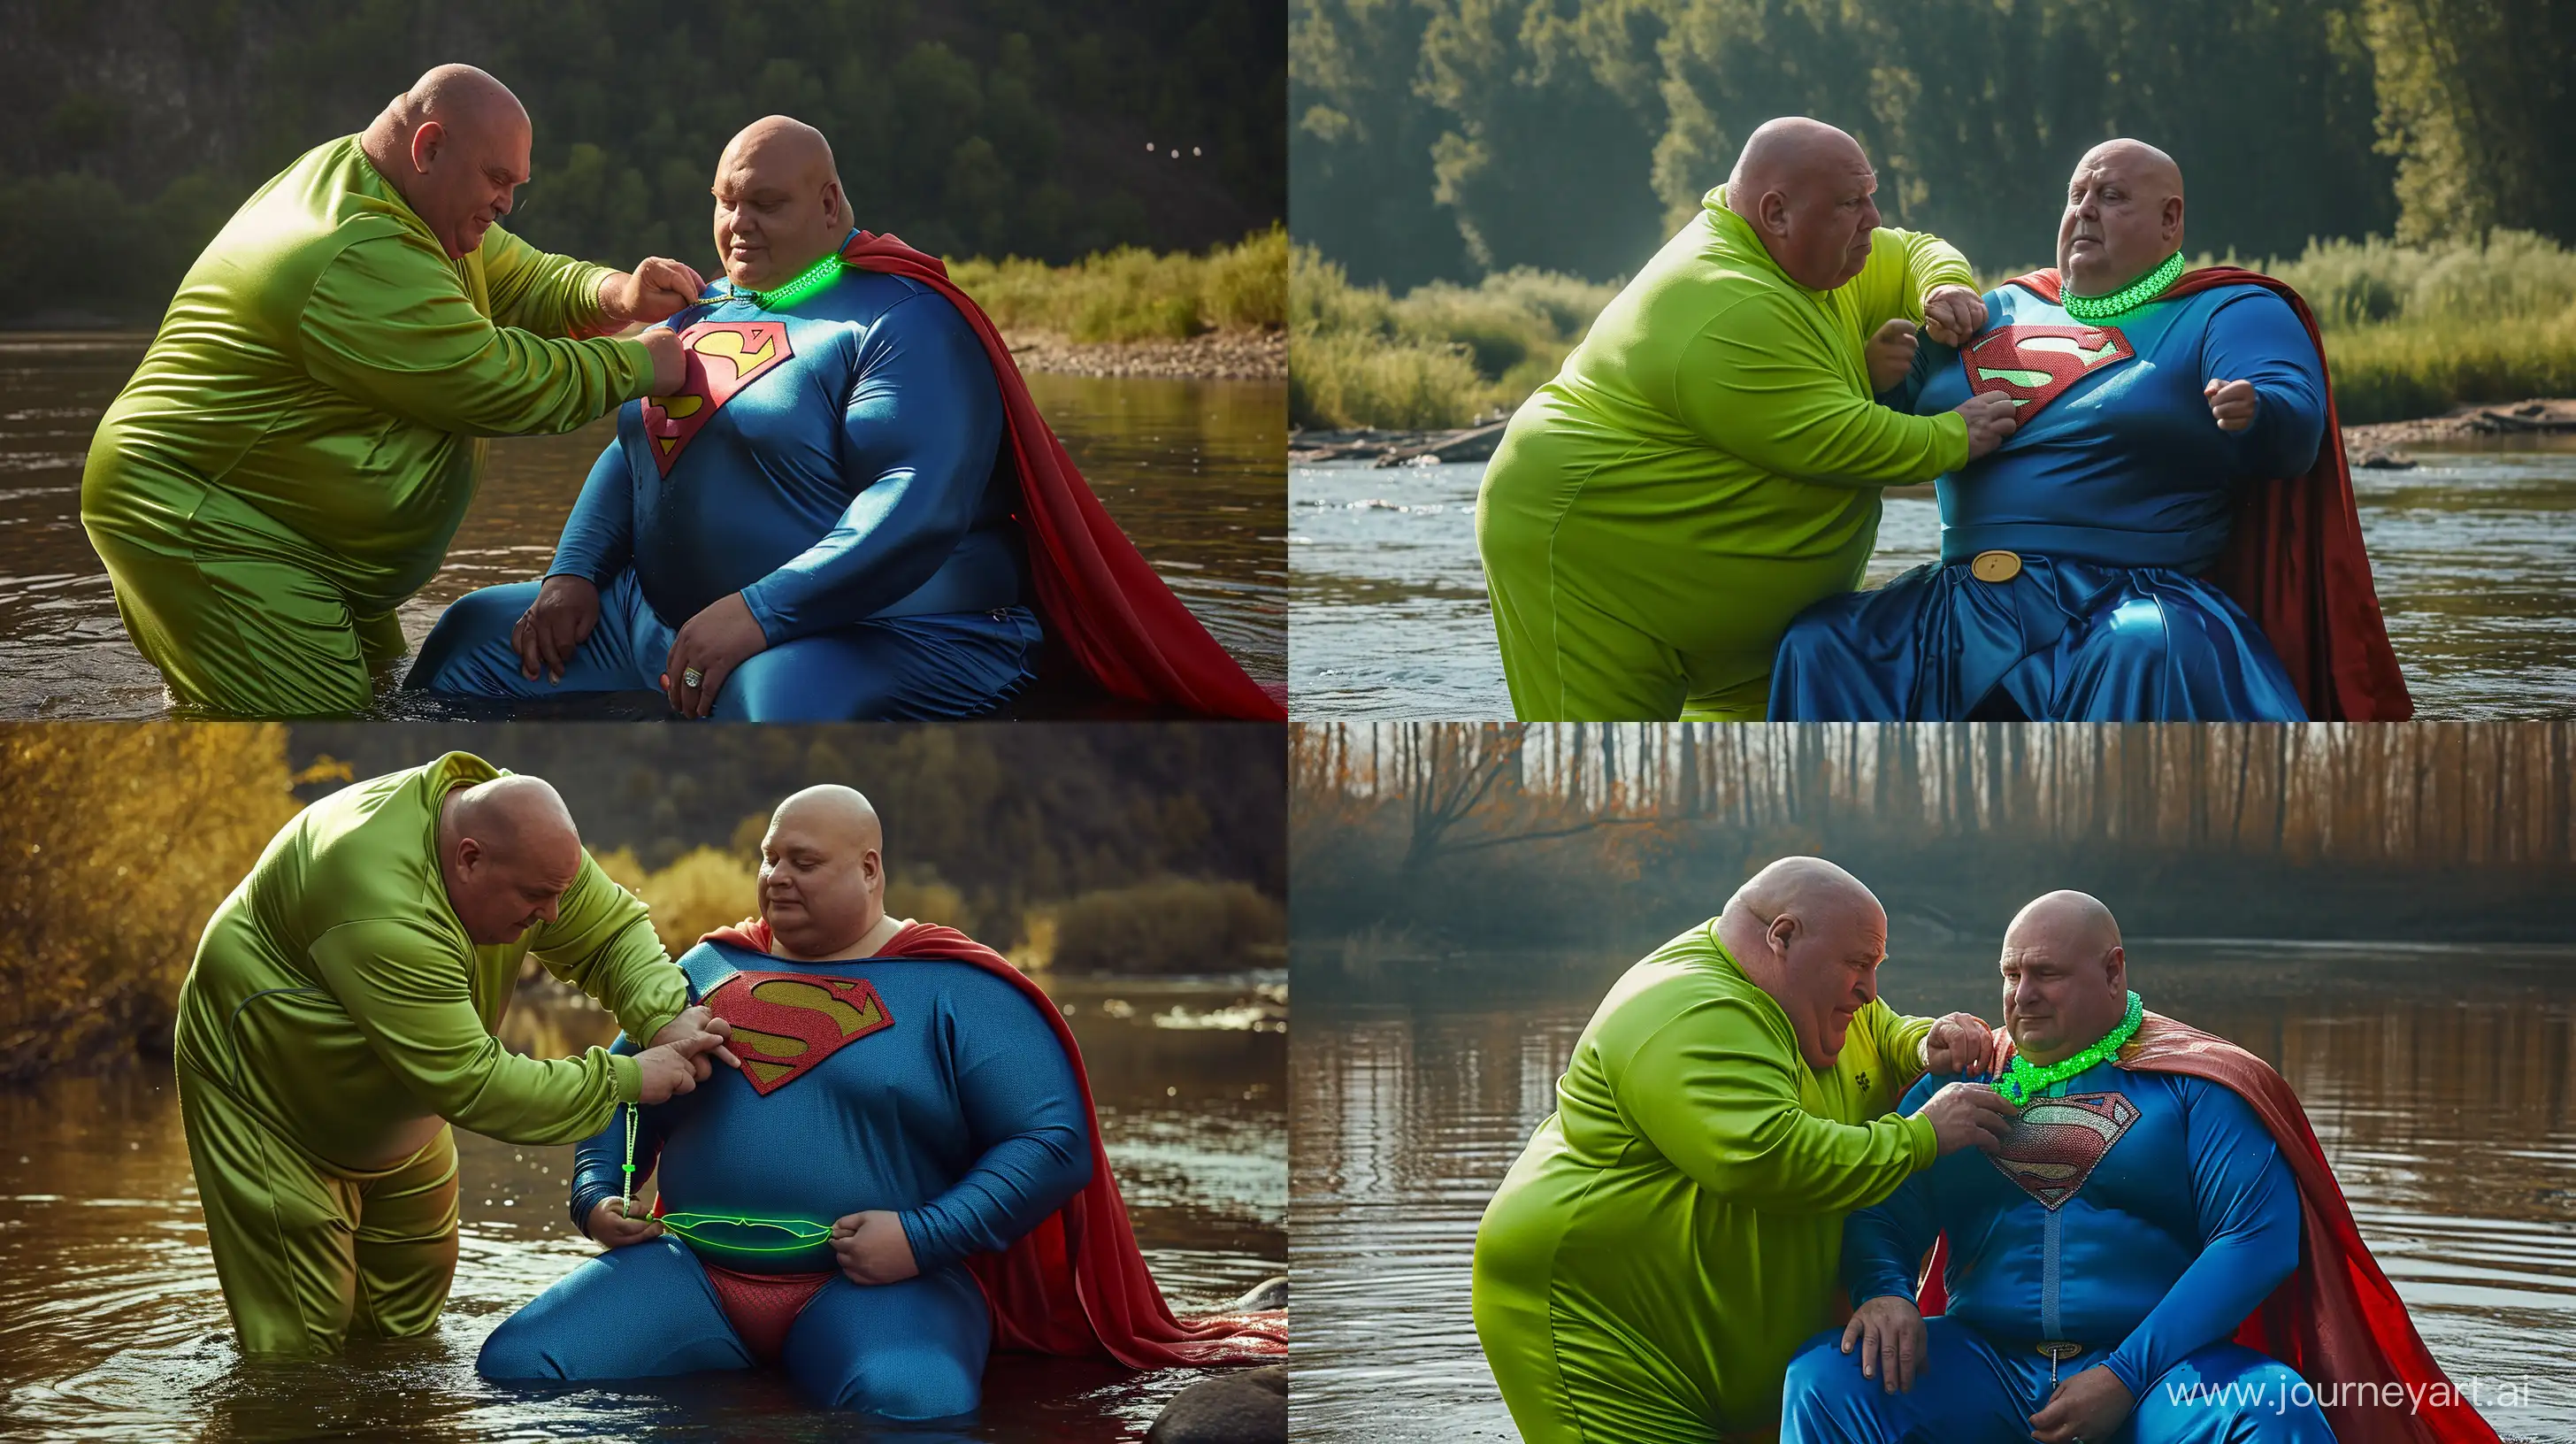 Elderly-Mens-Playful-River-Adventure-Collar-Tightening-in-Silky-Tracksuits-and-Superman-Costume